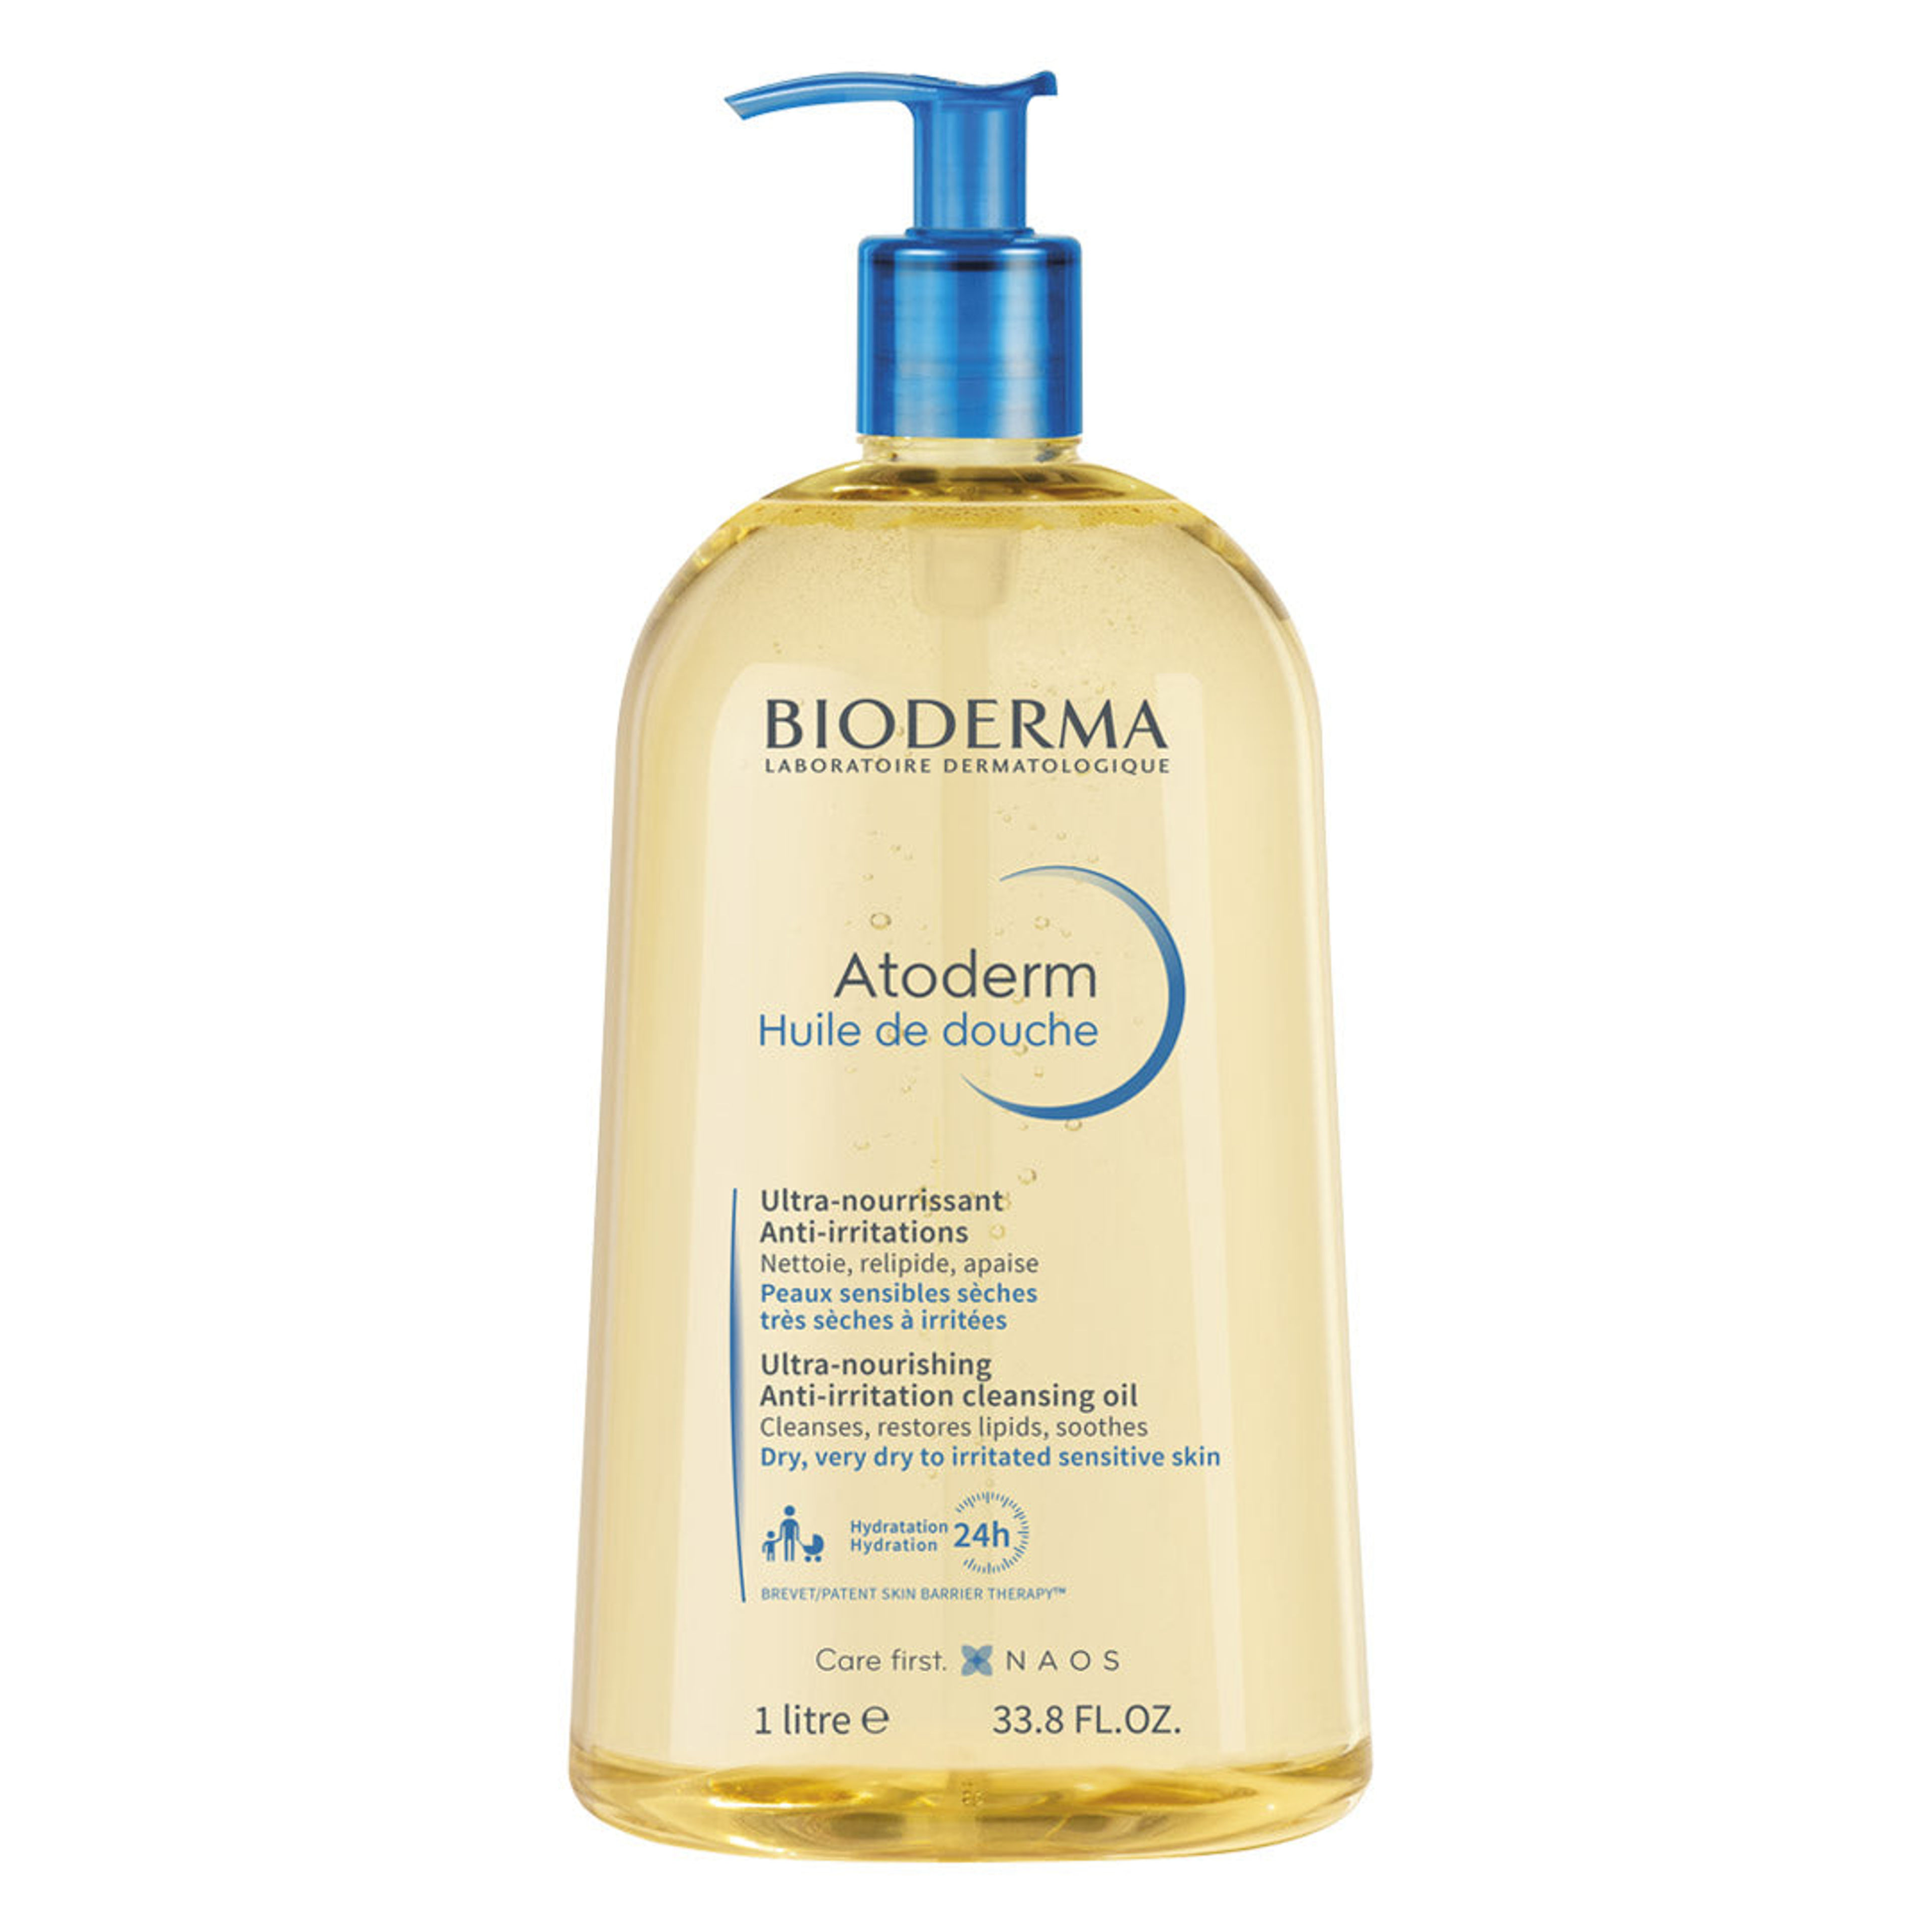  Atoderm Cleansing Oil for Normal to Very Dry Skin image 1 expanded